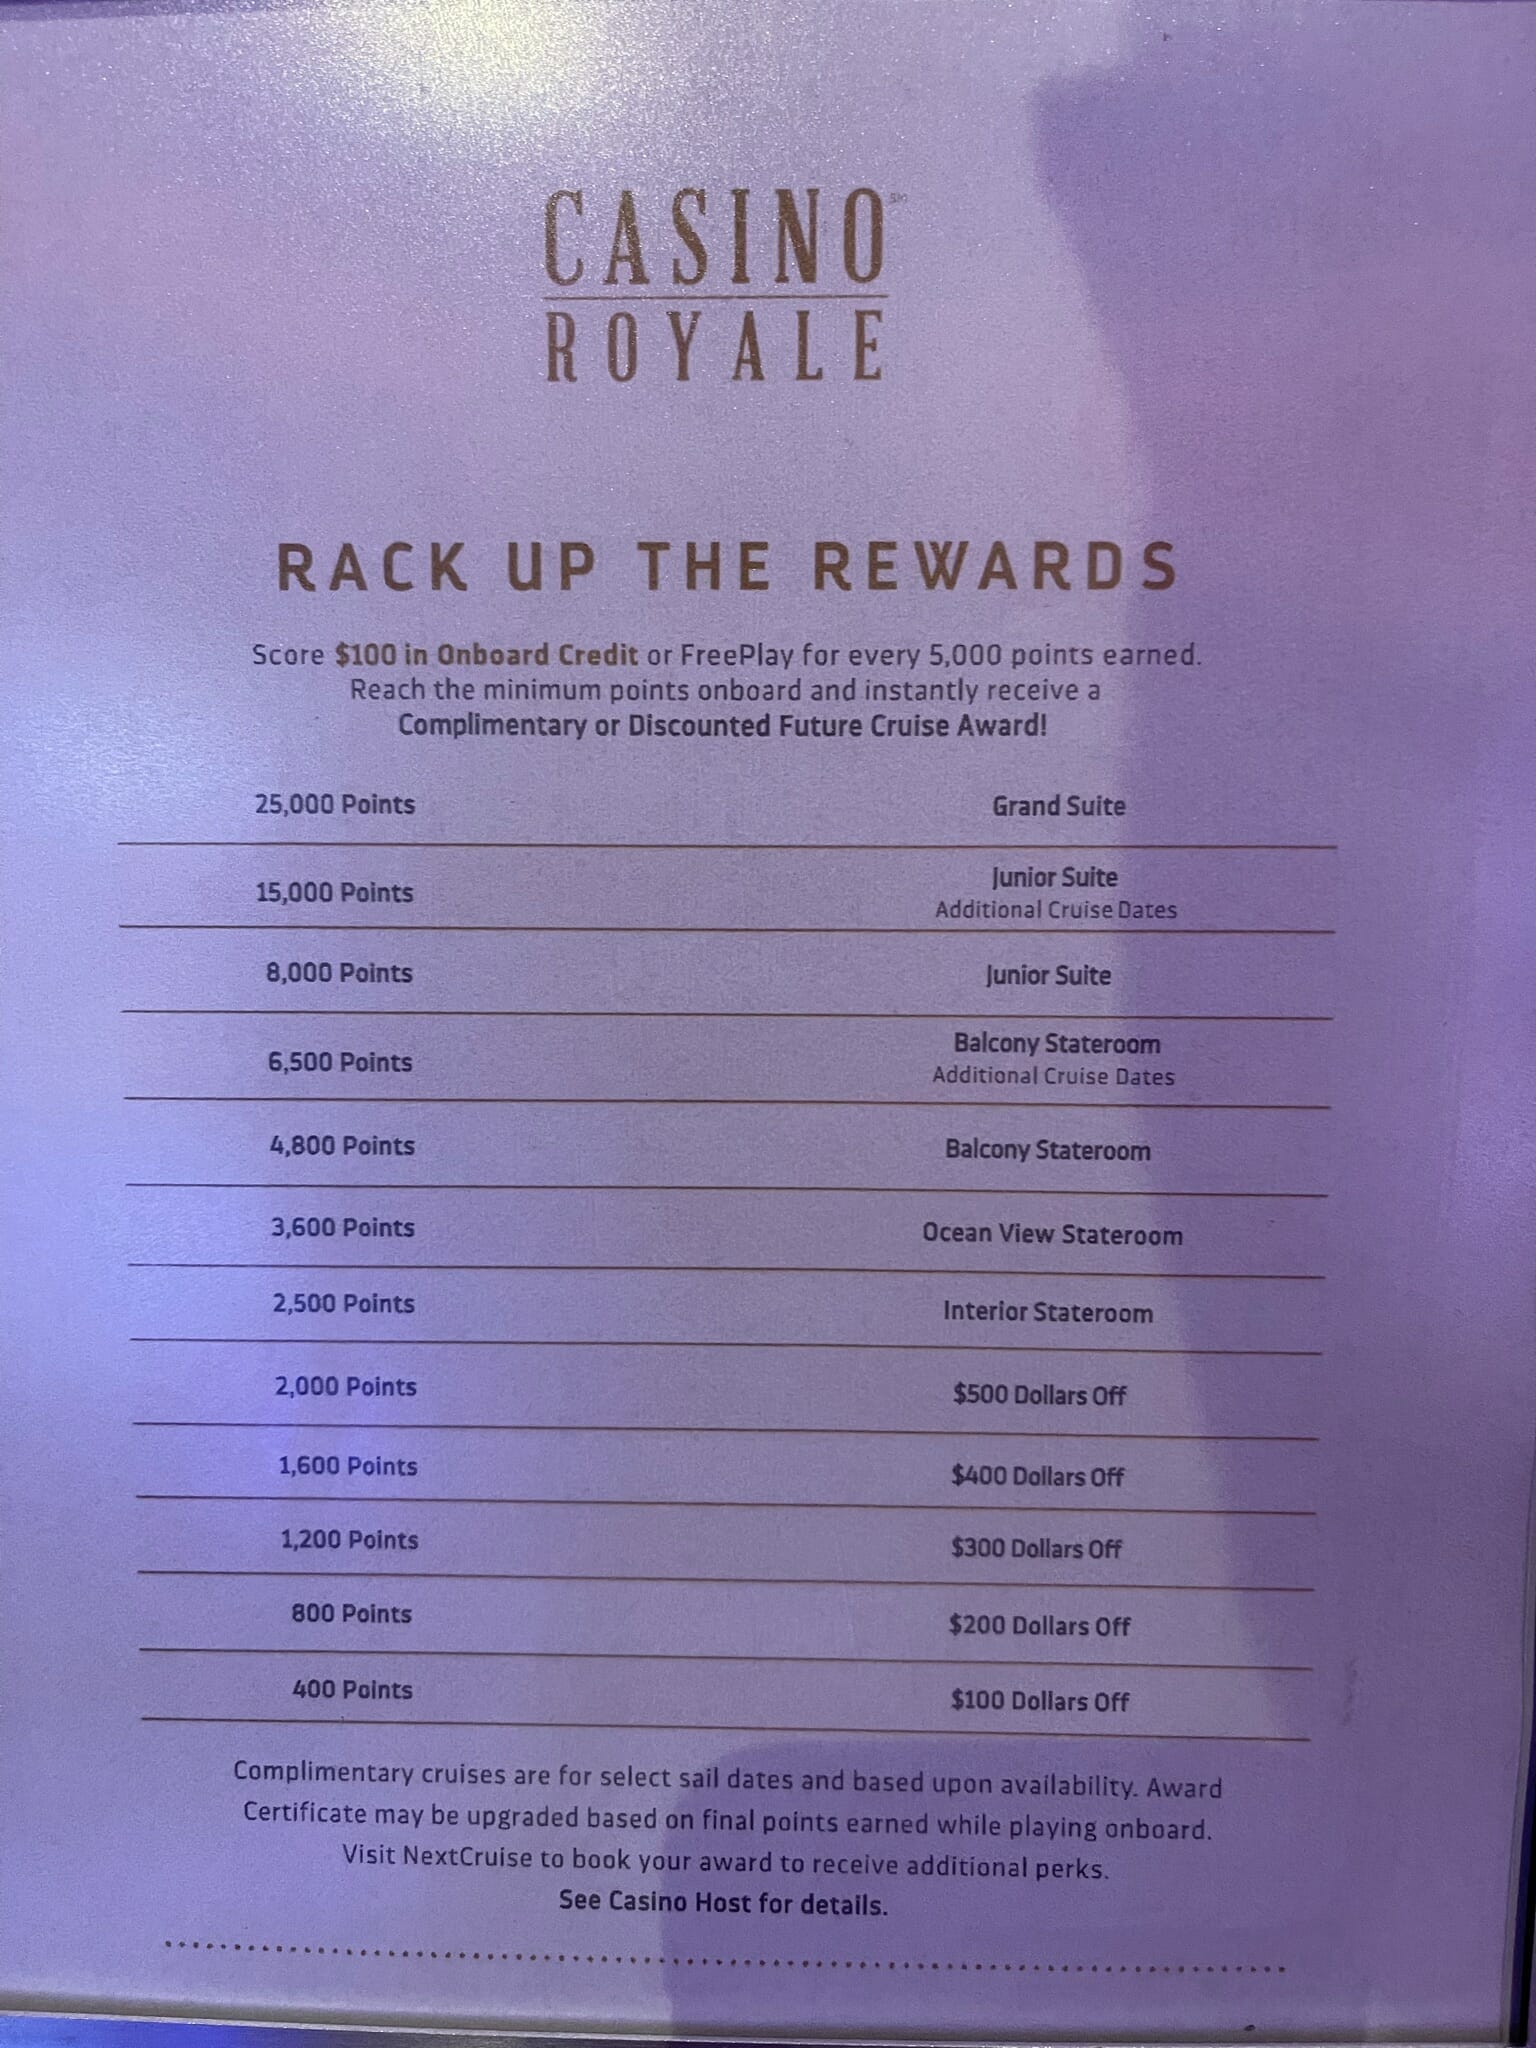 Three (or Four) Changes Spotted in Royal Caribbean’s Club Royale